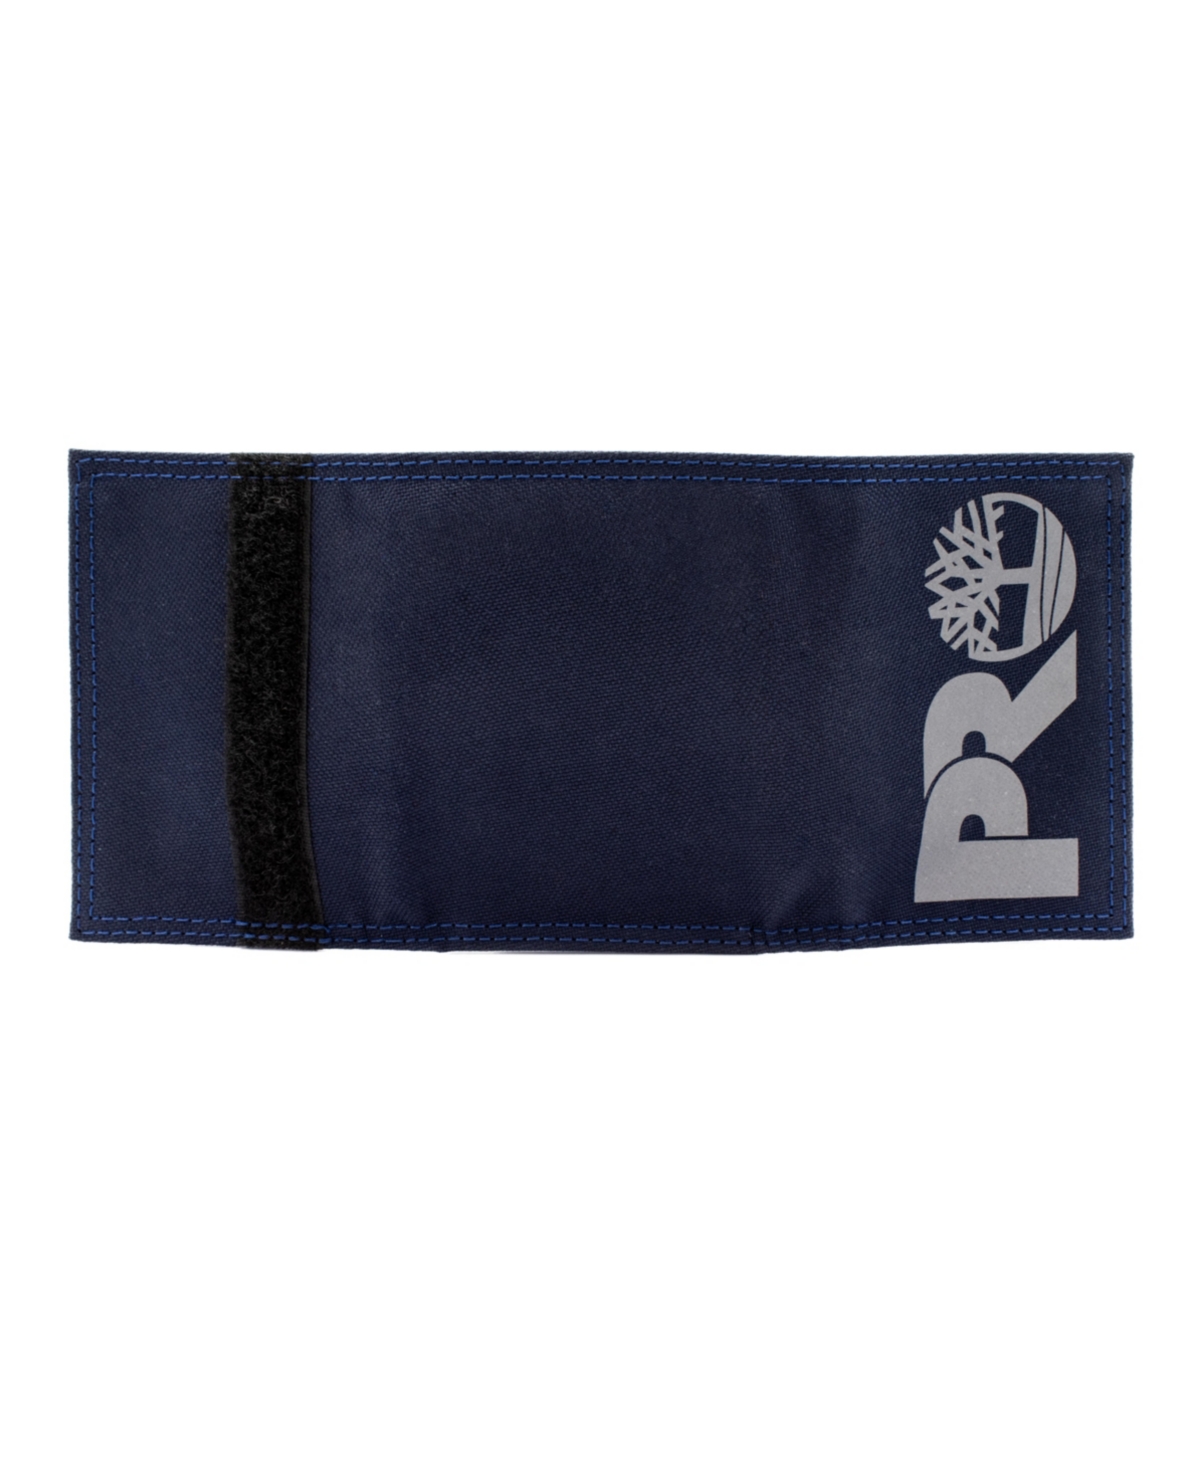 Timberland Men's Reflective Print Trifold Wallet In Navy